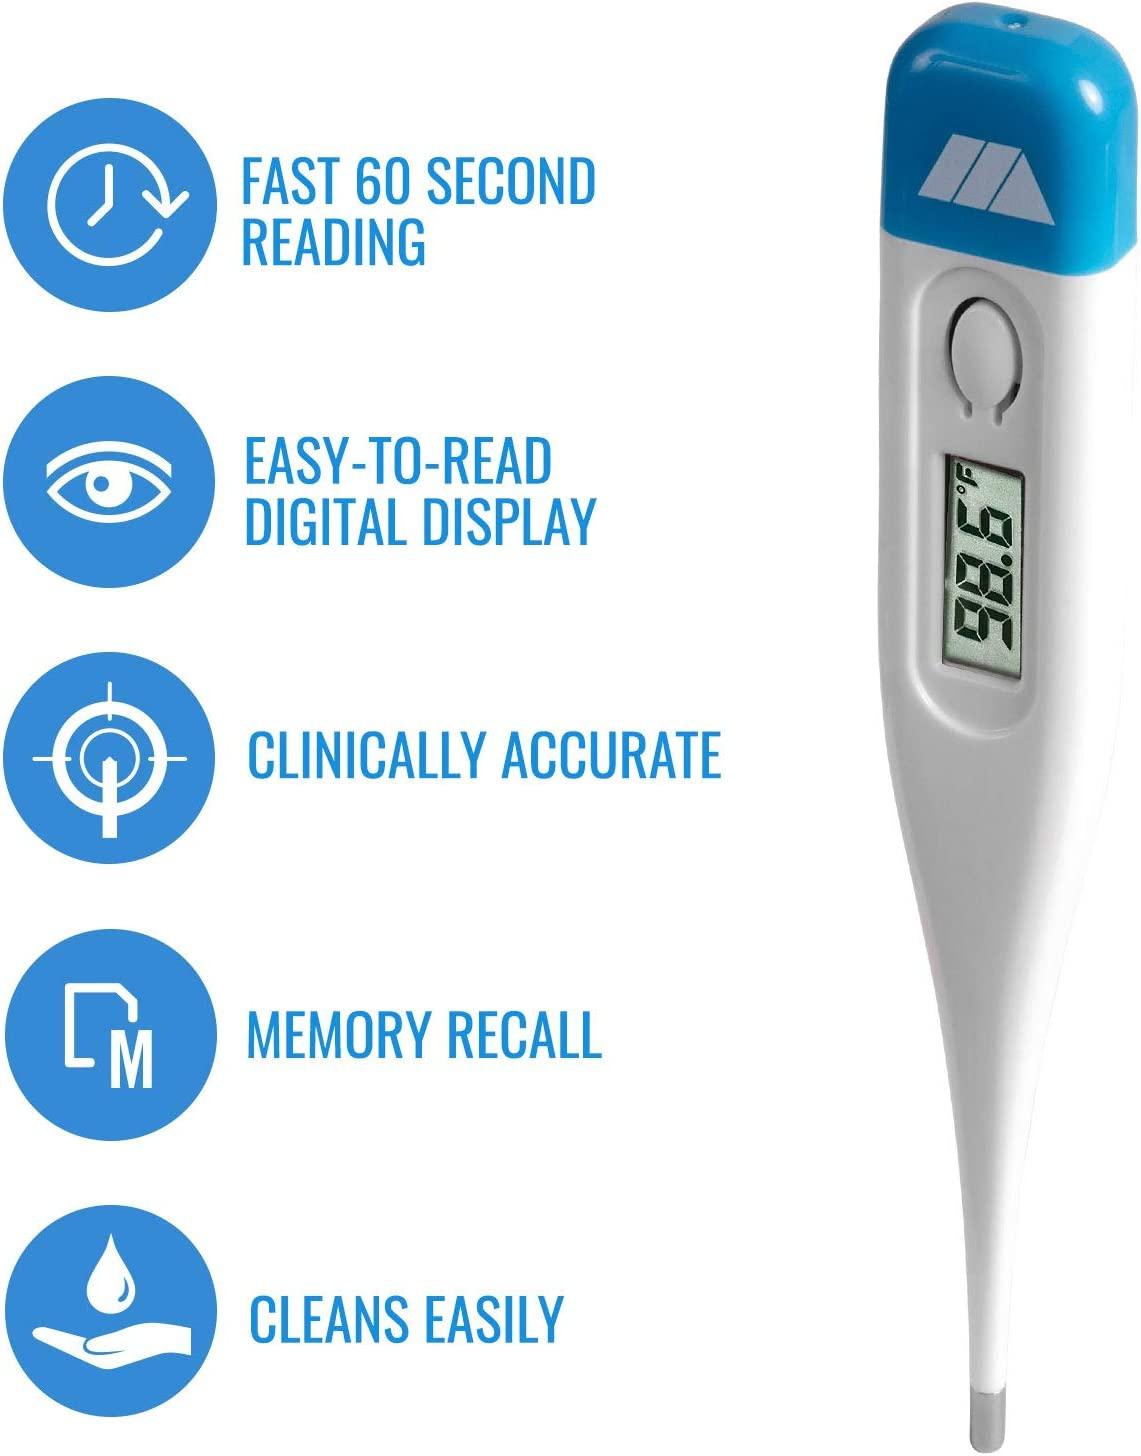 Mabis Basal Oral Digital Thermometer Stick LCD Display 15-639-000 1 Each